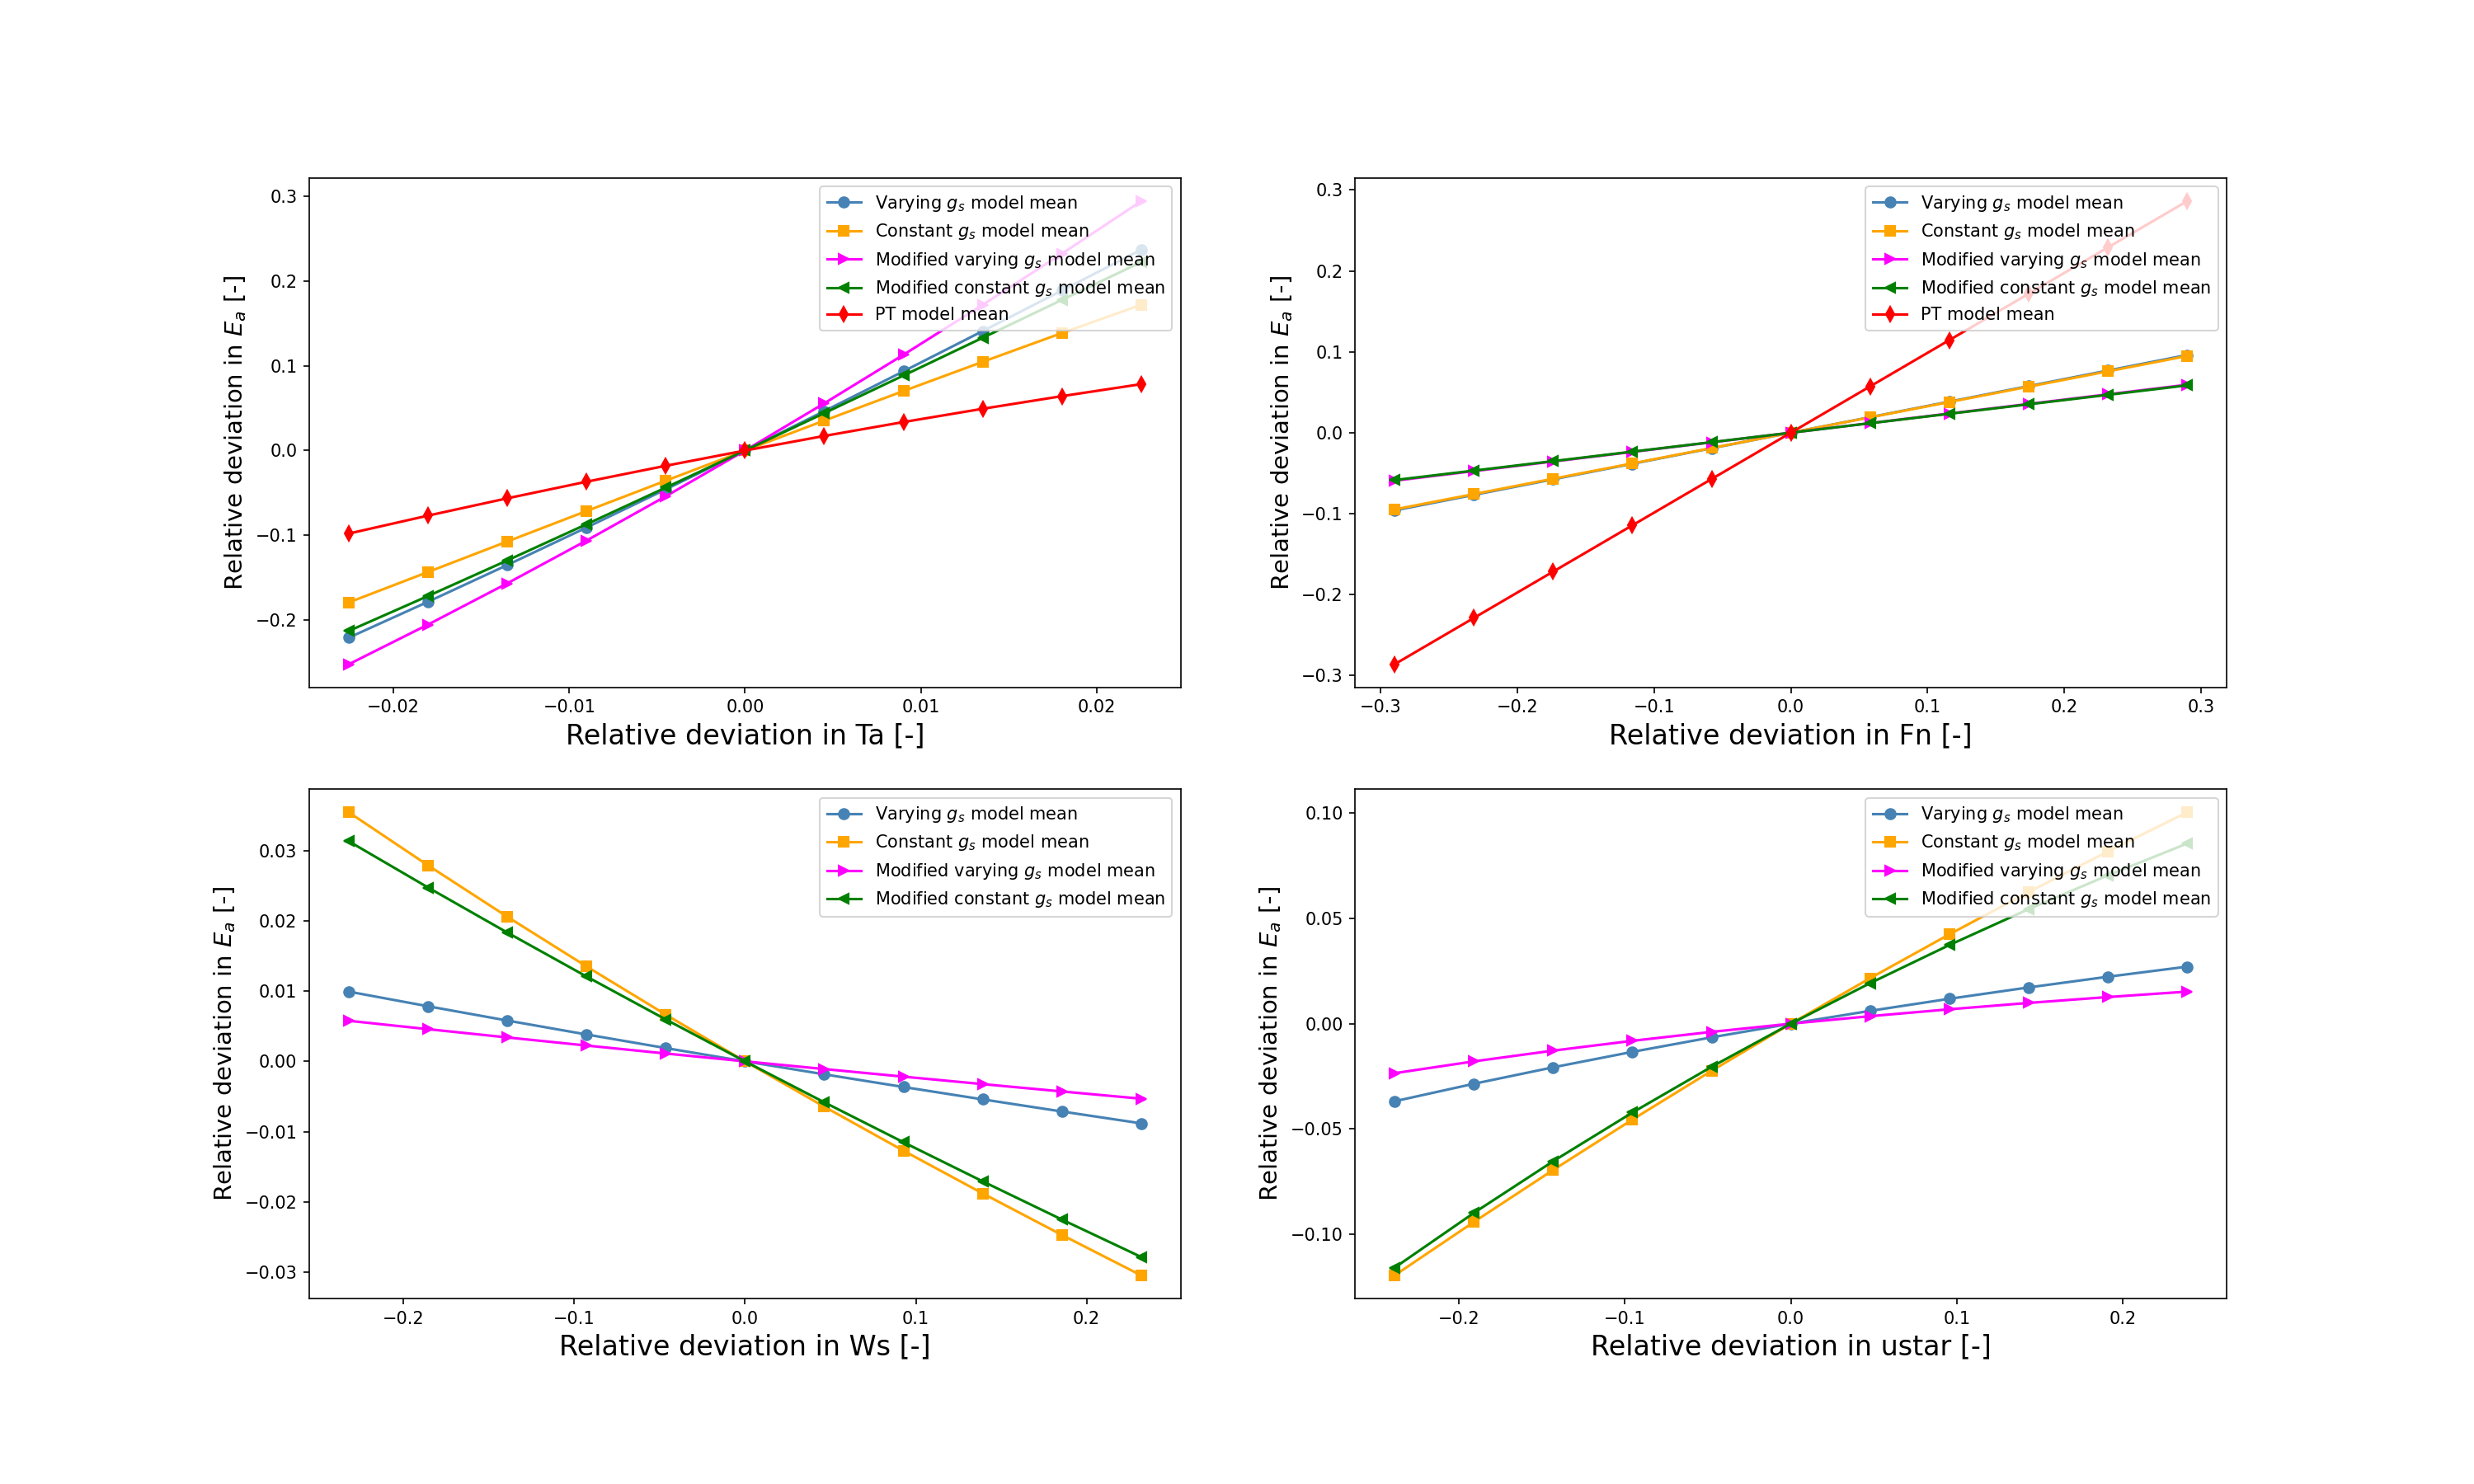 notebooks/Finished_project/simpler_model/Influence_atmo_rel_dry_sturt.png